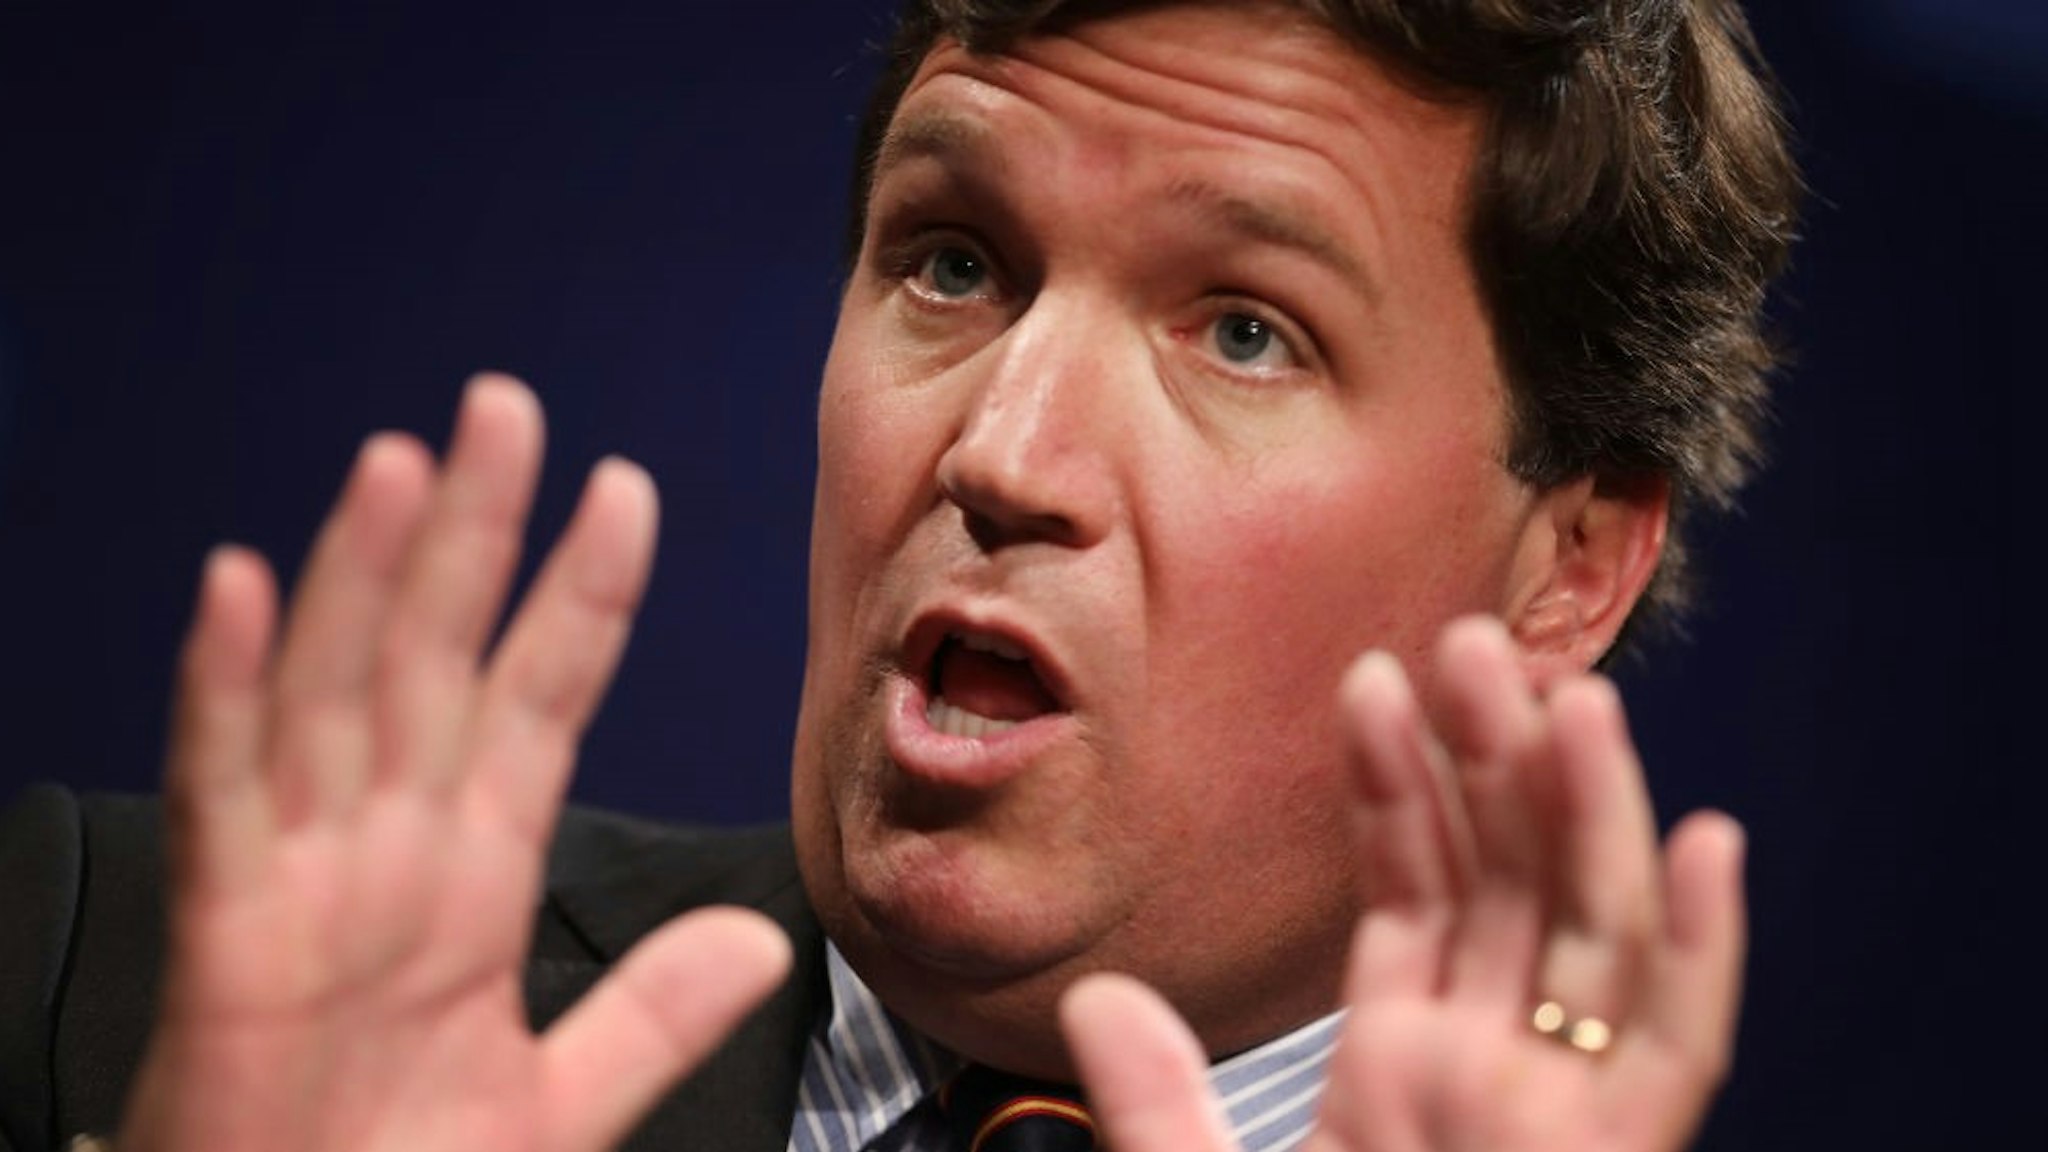 WASHINGTON, DC - MARCH 29: Fox News host Tucker Carlson discusses 'Populism and the Right' during the National Review Institute's Ideas Summit at the Mandarin Oriental Hotel March 29, 2019 in Washington, DC. Carlson talked about a large variety of topics including dropping testosterone levels, increasing rates of suicide, unemployment, drug addiction and social hierarchy at the summit, which had the theme 'The Case for the American Experiment.' (Photo by